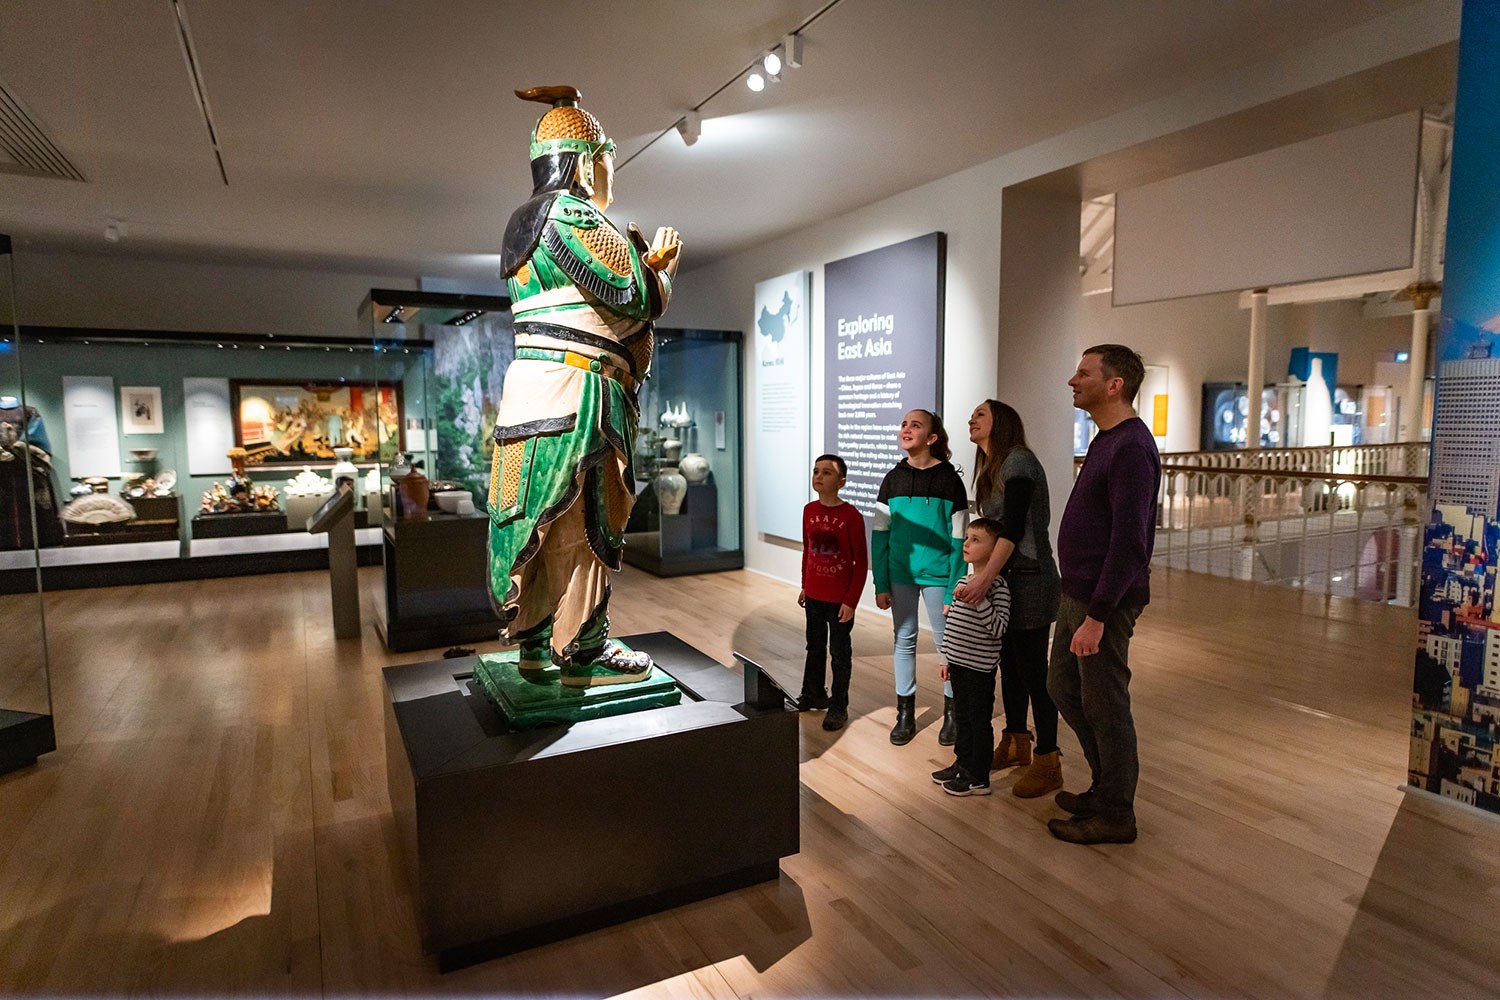 A family looking up at a statue in the Exploring East Asia gallery.